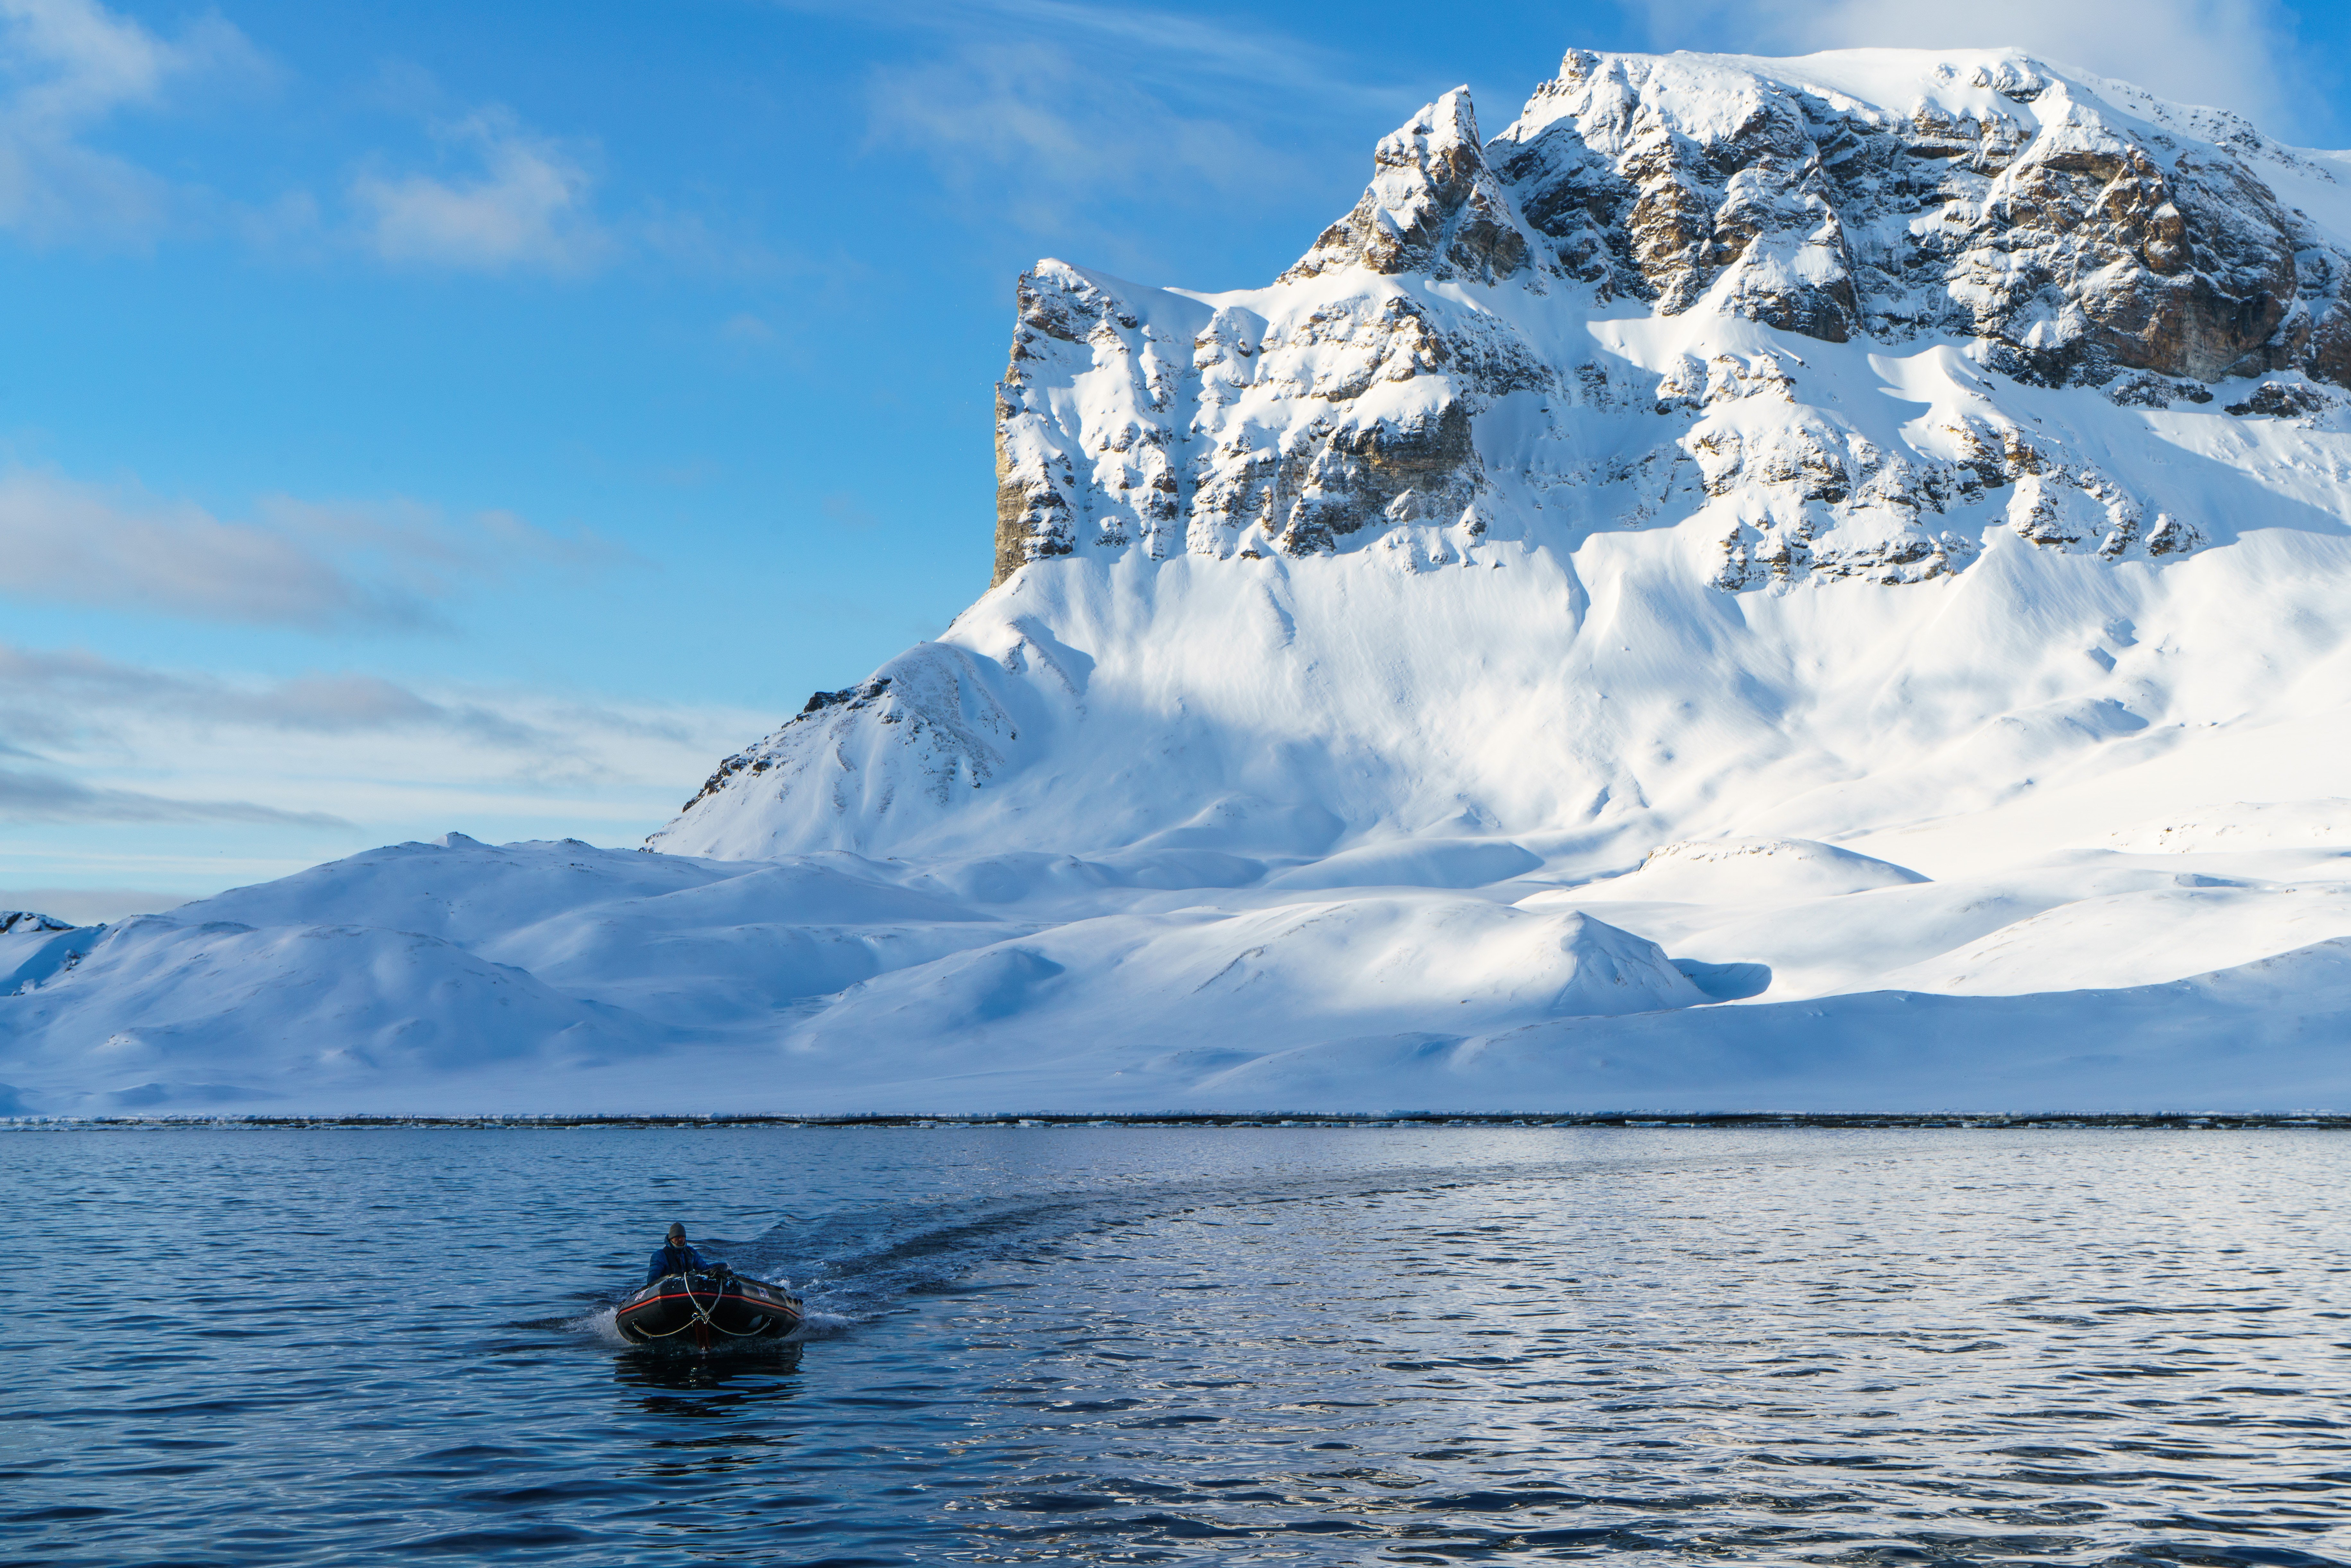 Robert Wolting, first mate of the Arctic expedition sailing ship Noorderlicht, returns in a Zodiac boat from reconnoitring a landing on Alkhornet mountain in Spitsbergen, Norway. Photo: Tessa Chan